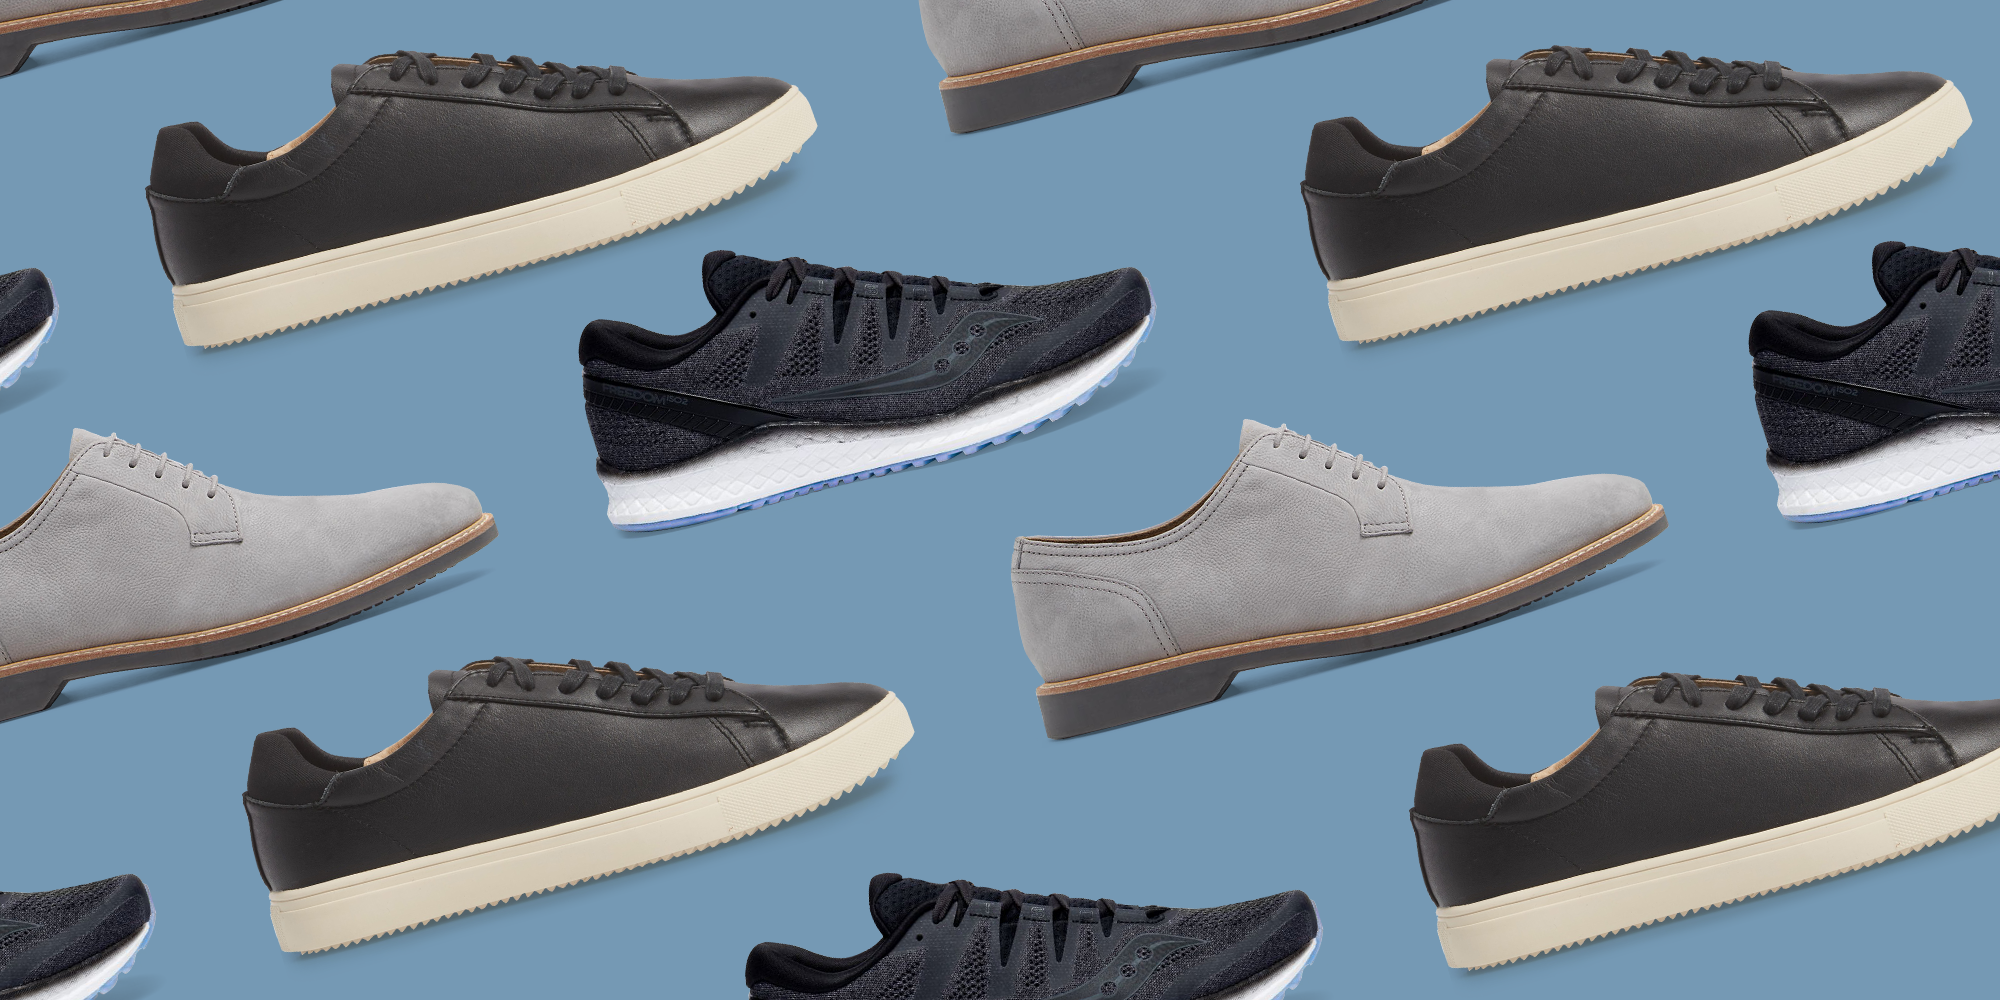 The Best Dress Shoes and Styles for Men on Every Occasion